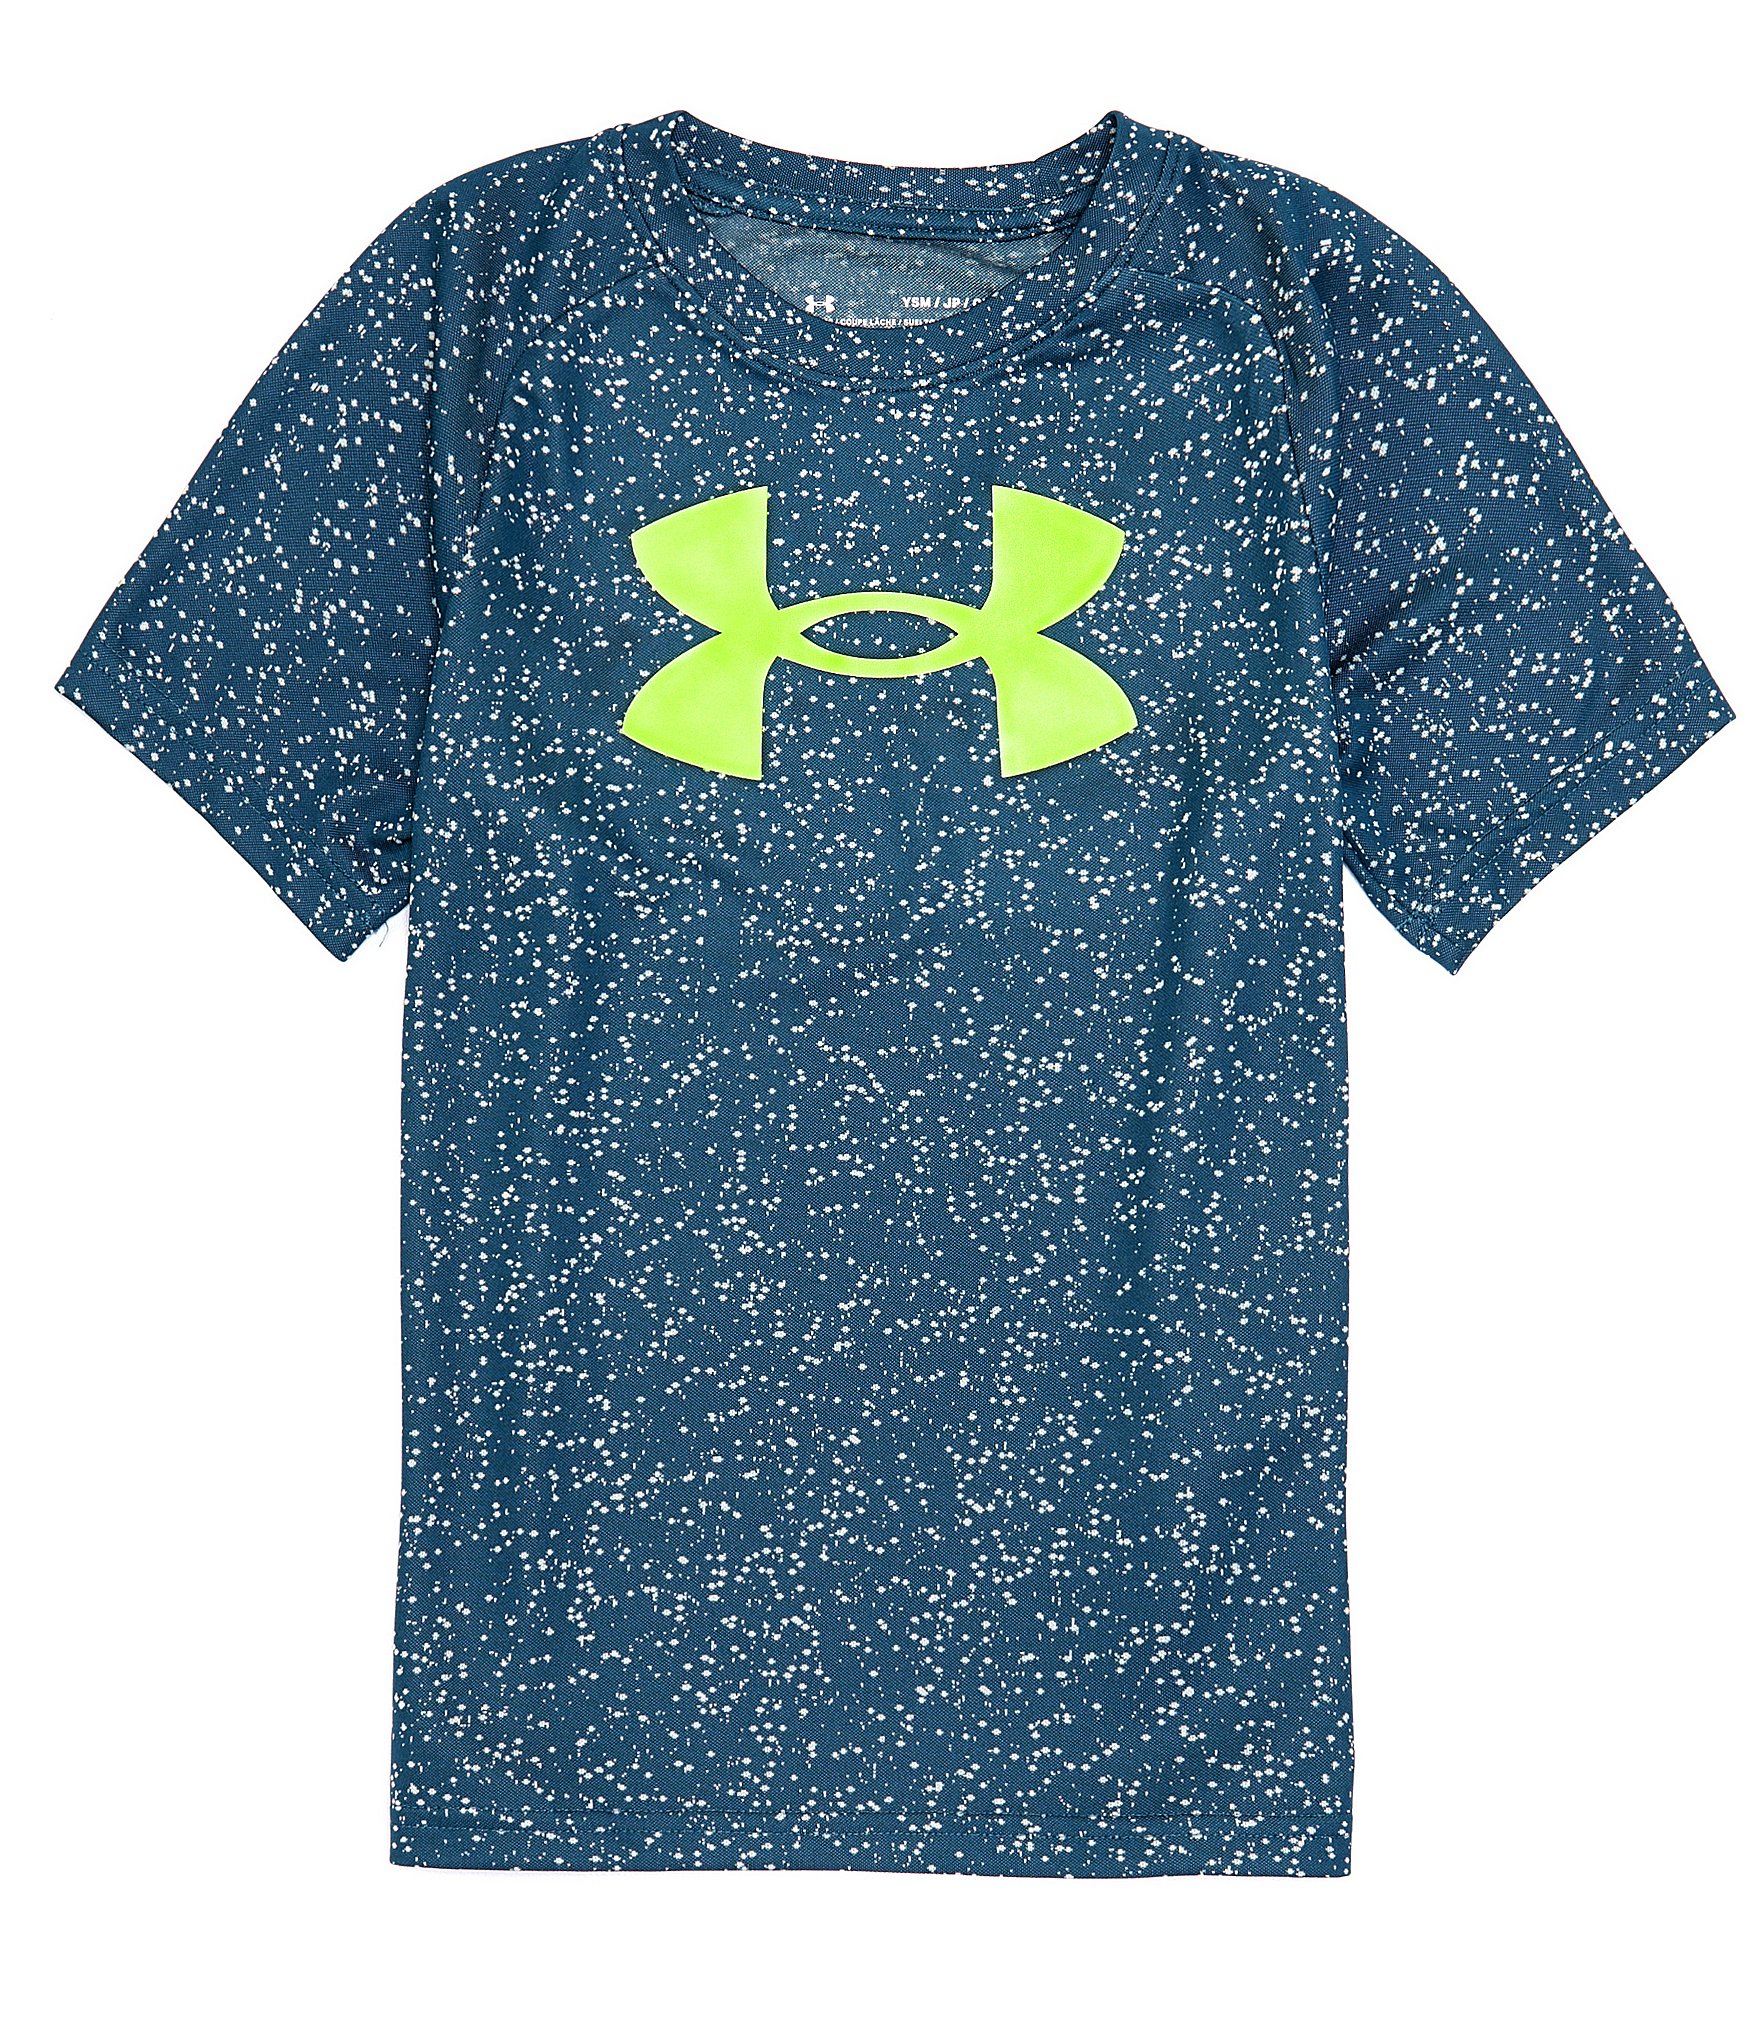 under armour shirts